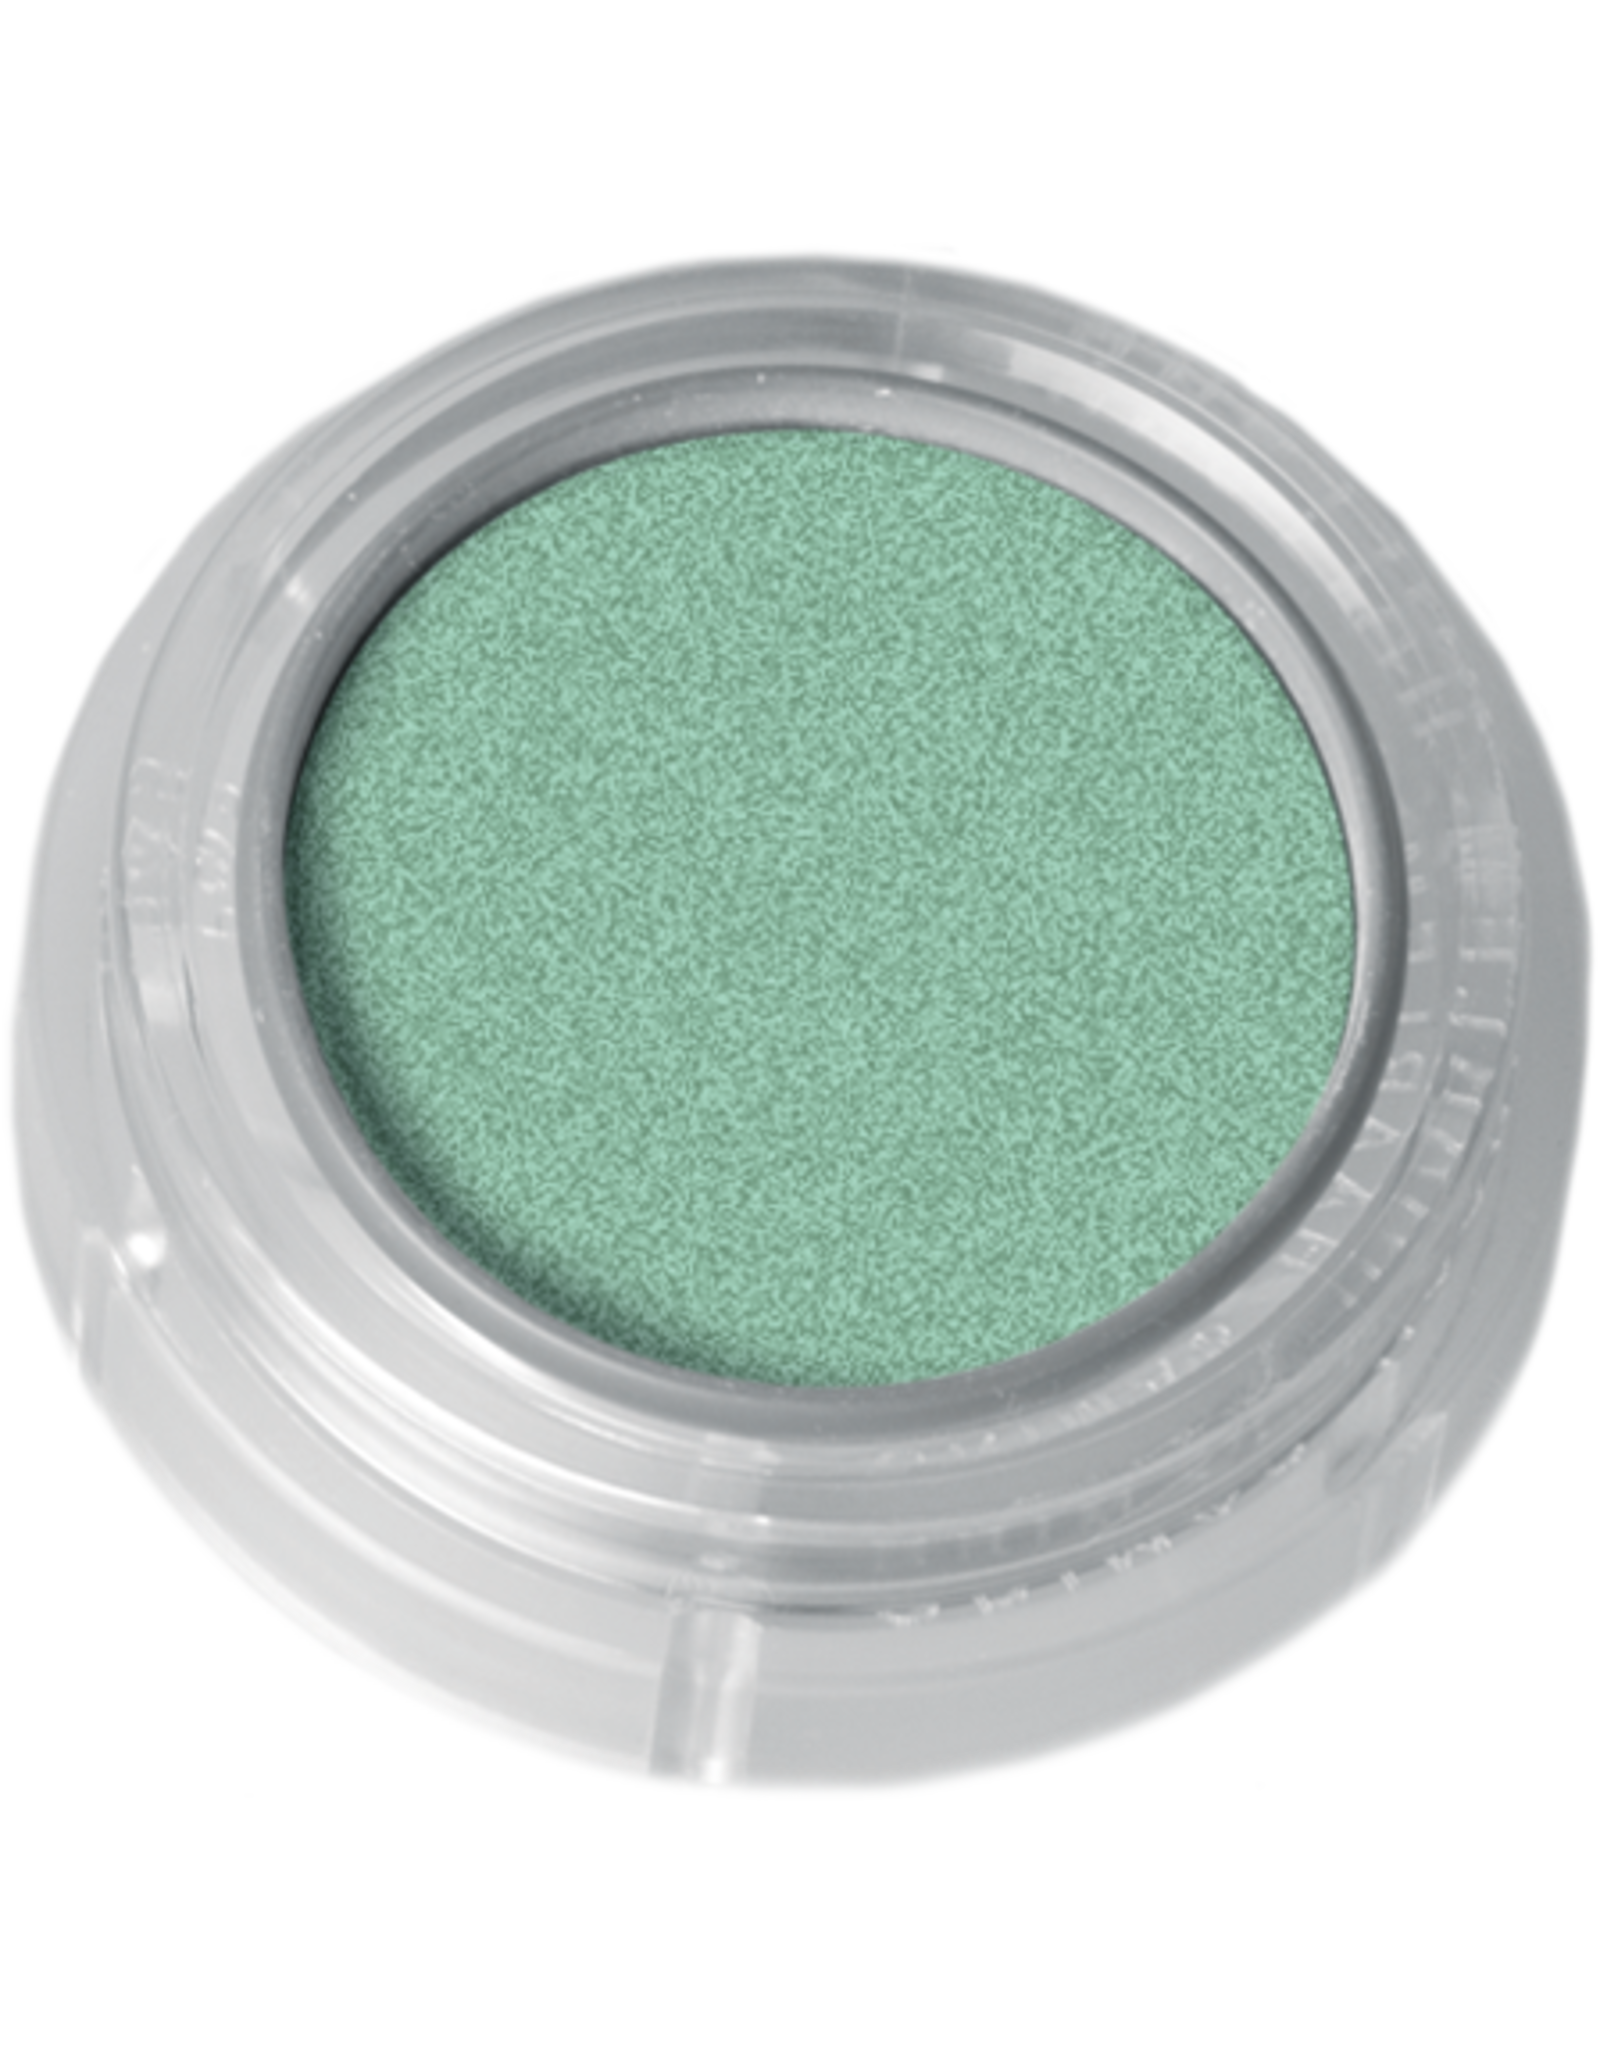 Grimas Water Make up Pearl Pure 742 - Turquoise - 2.5ml